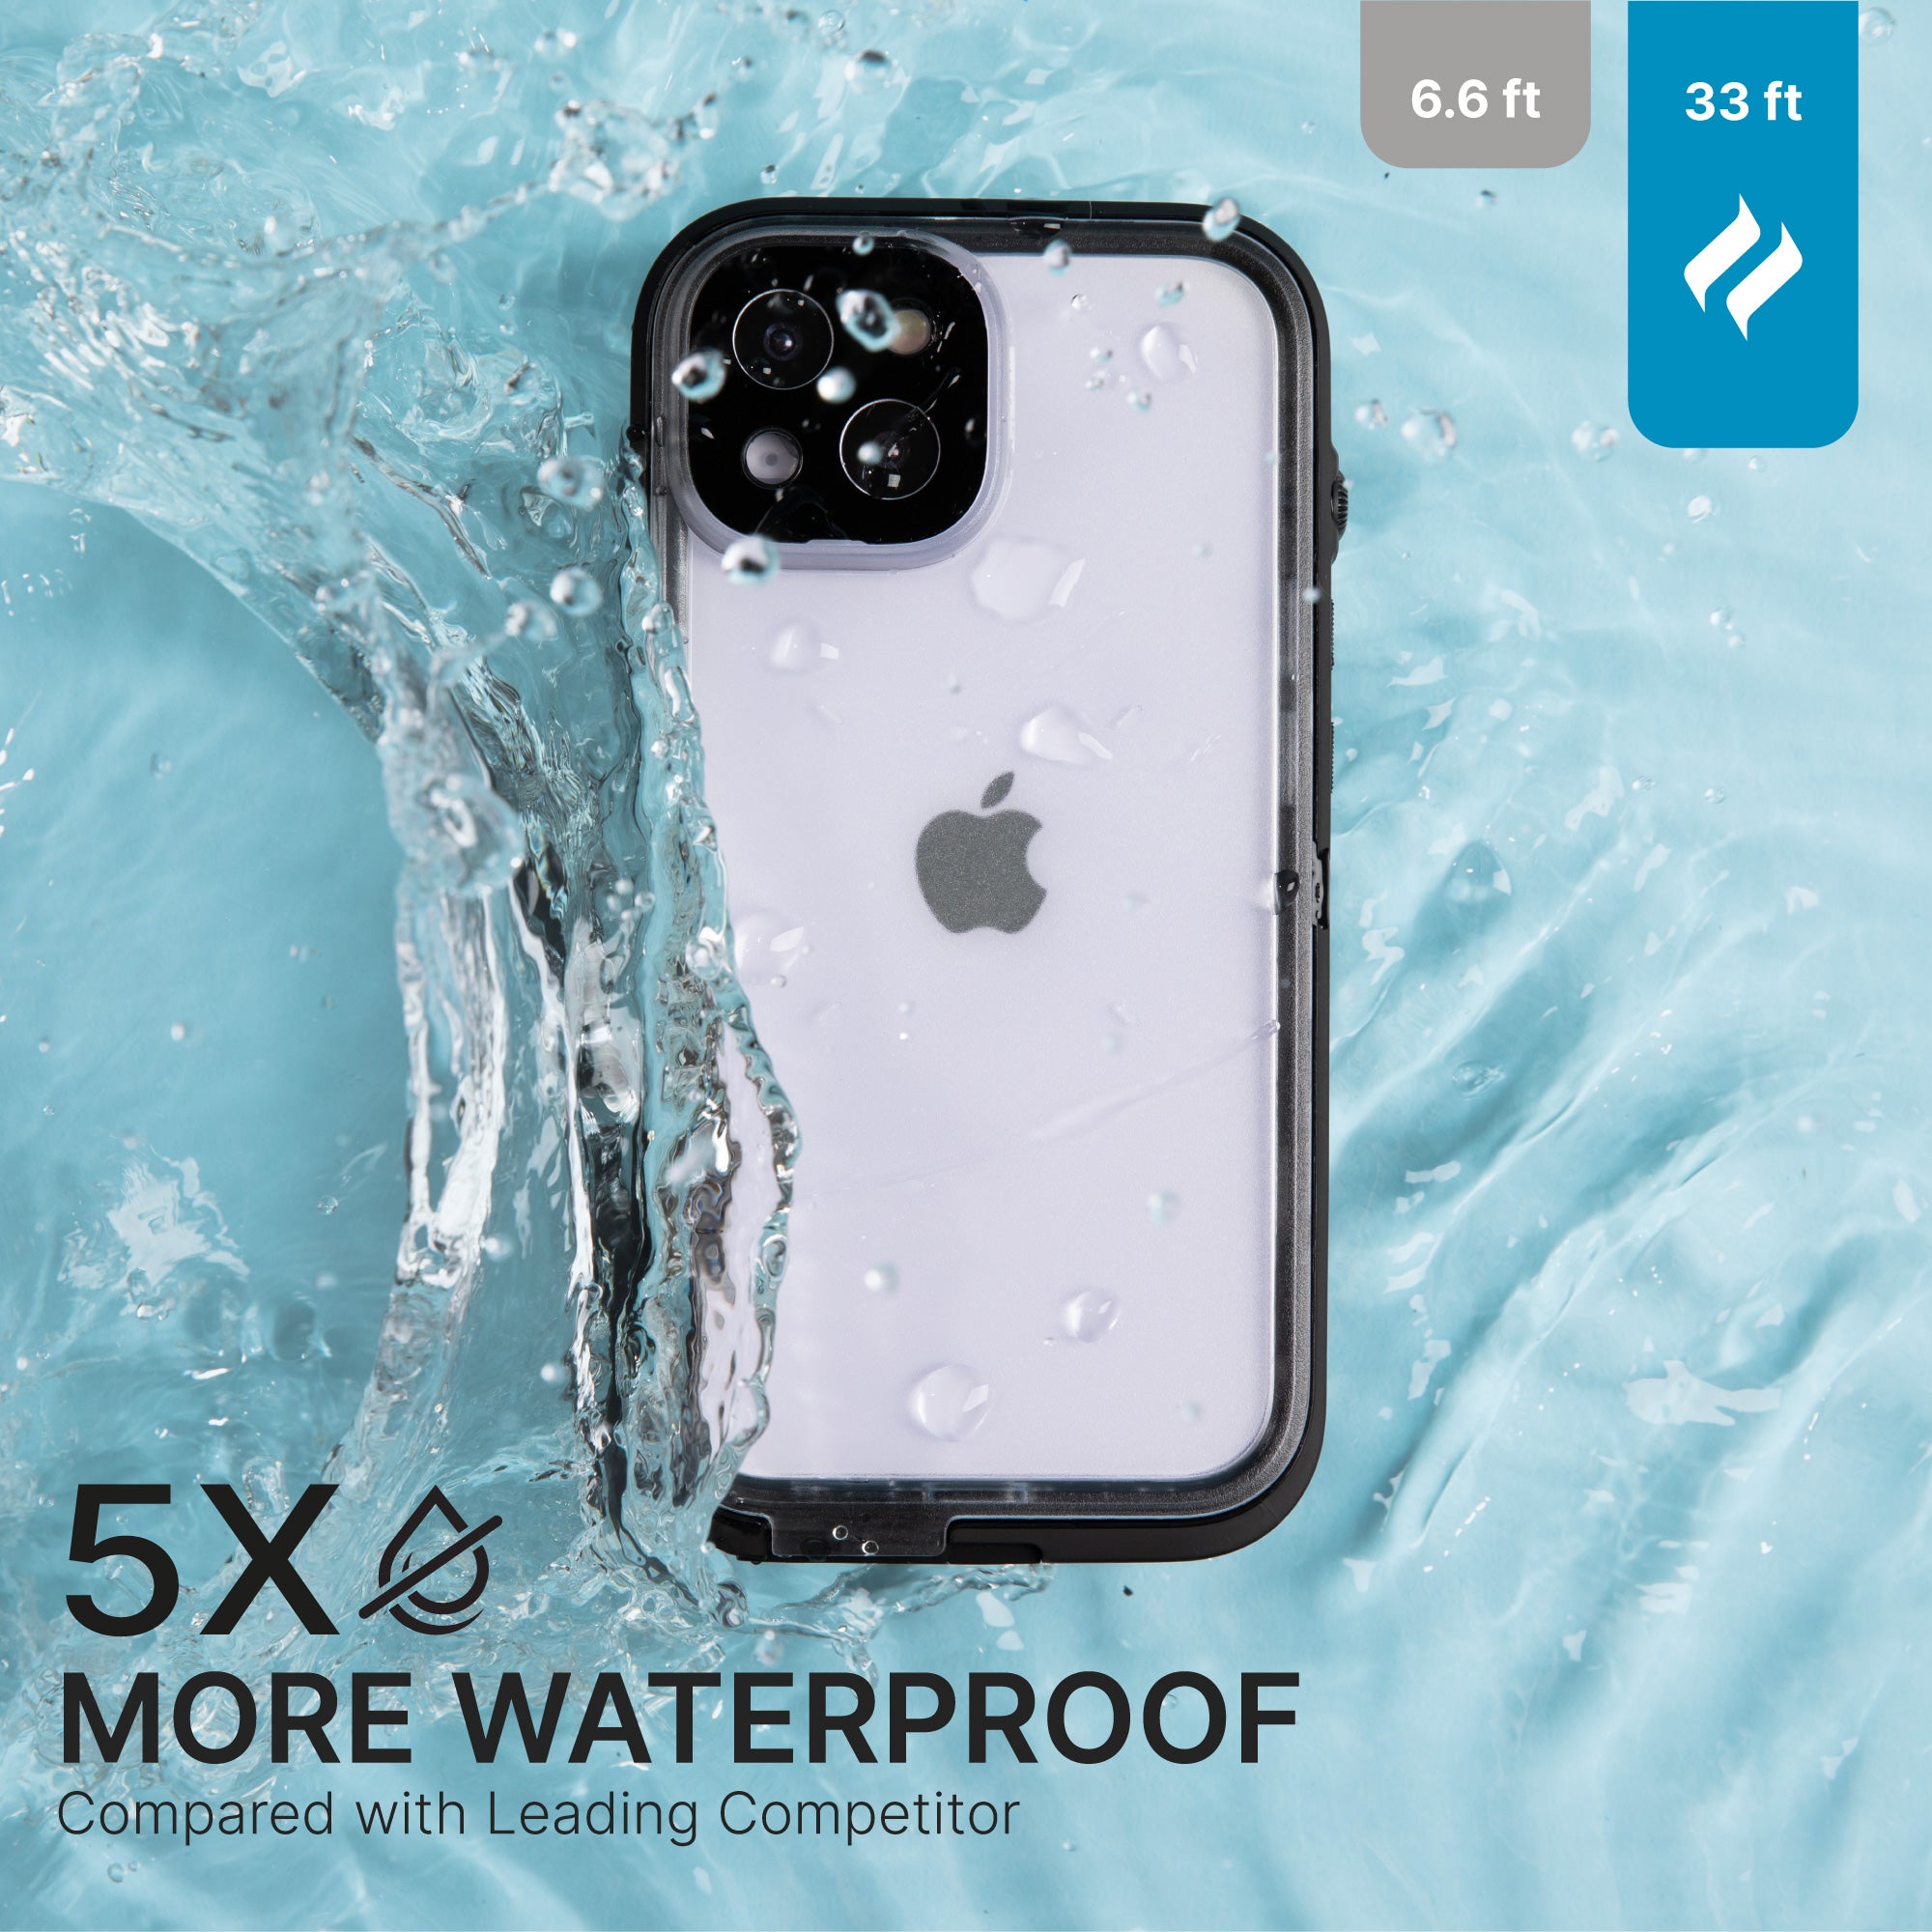 CATIPHO14BLKM-FBA | Catalyst iPhone 14 Waterproof Case Total Protection case splashed in water 5 times more waterproof